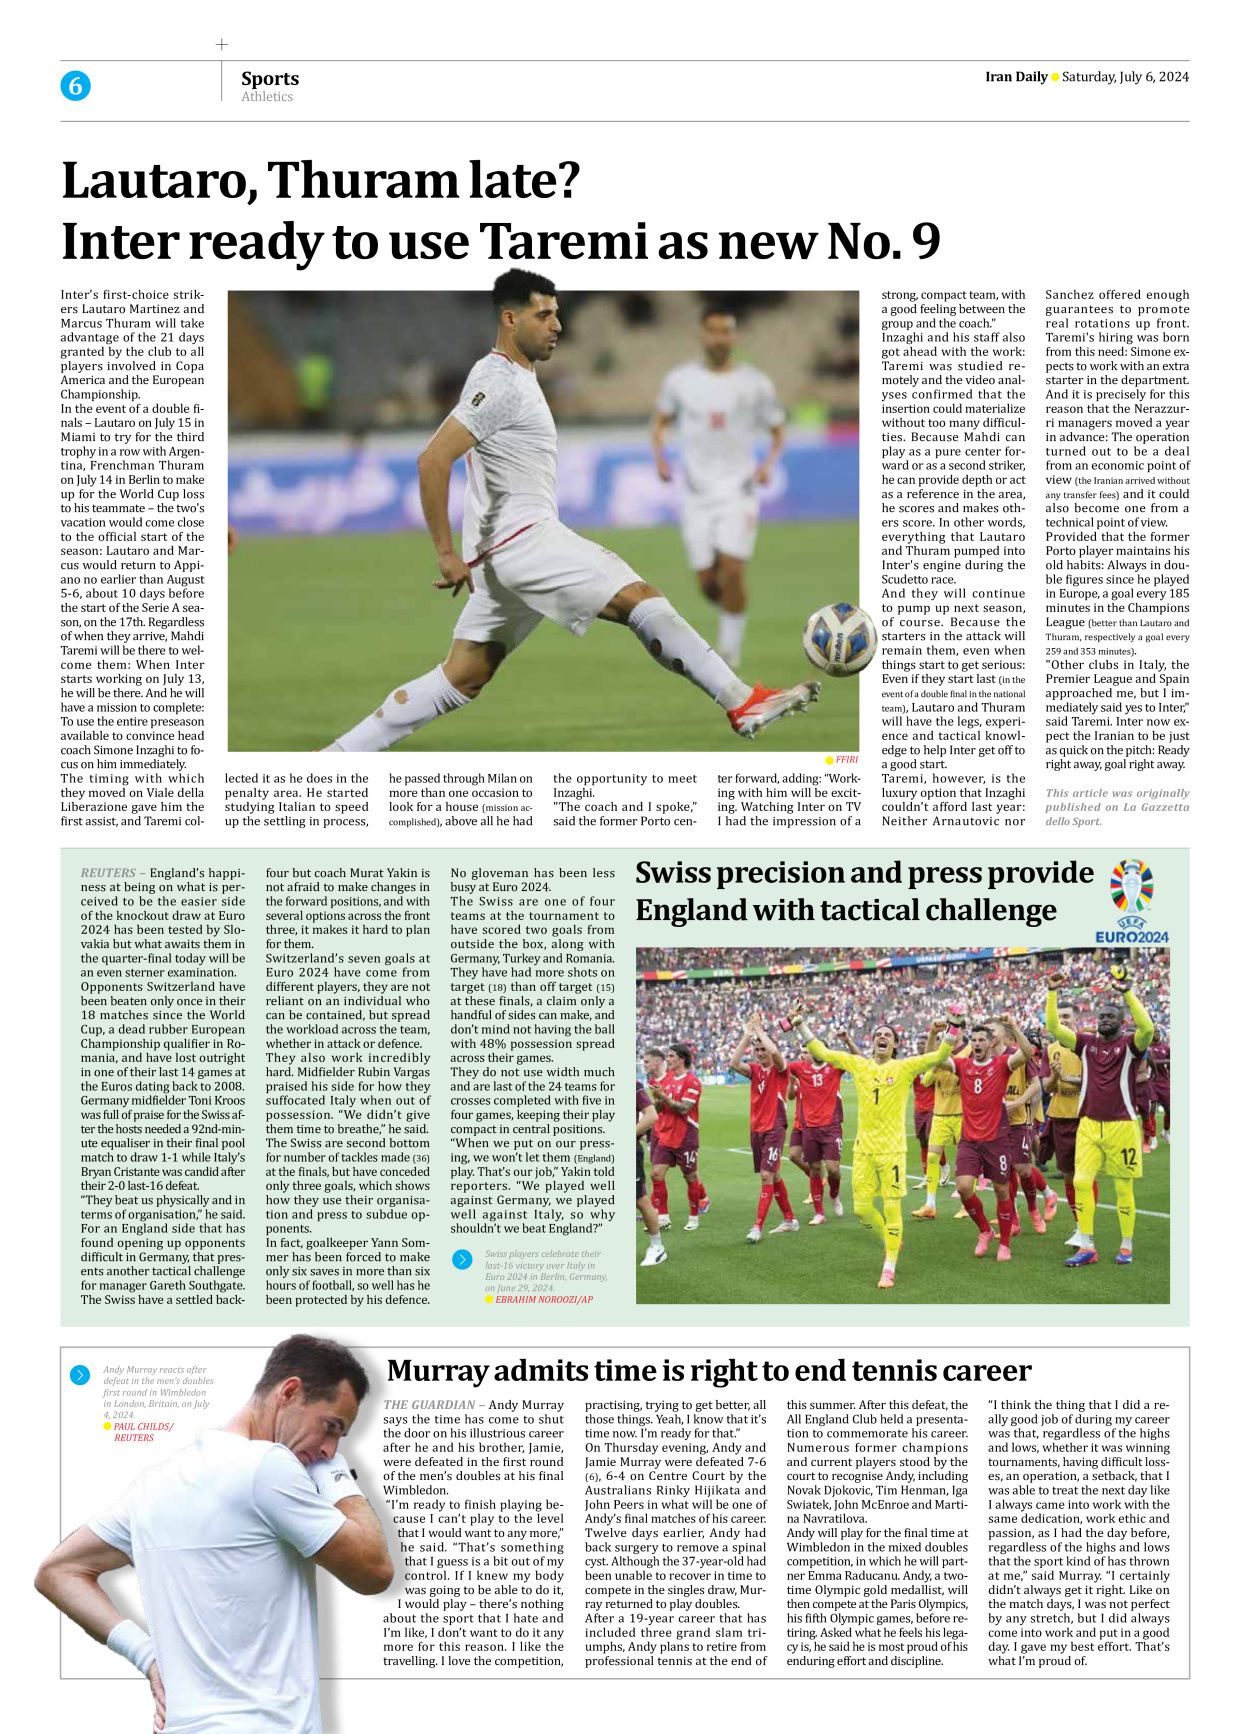 Iran Daily - Number Seven Thousand Five Hundred and Ninety Seven - 06 July 2024 - Page 6